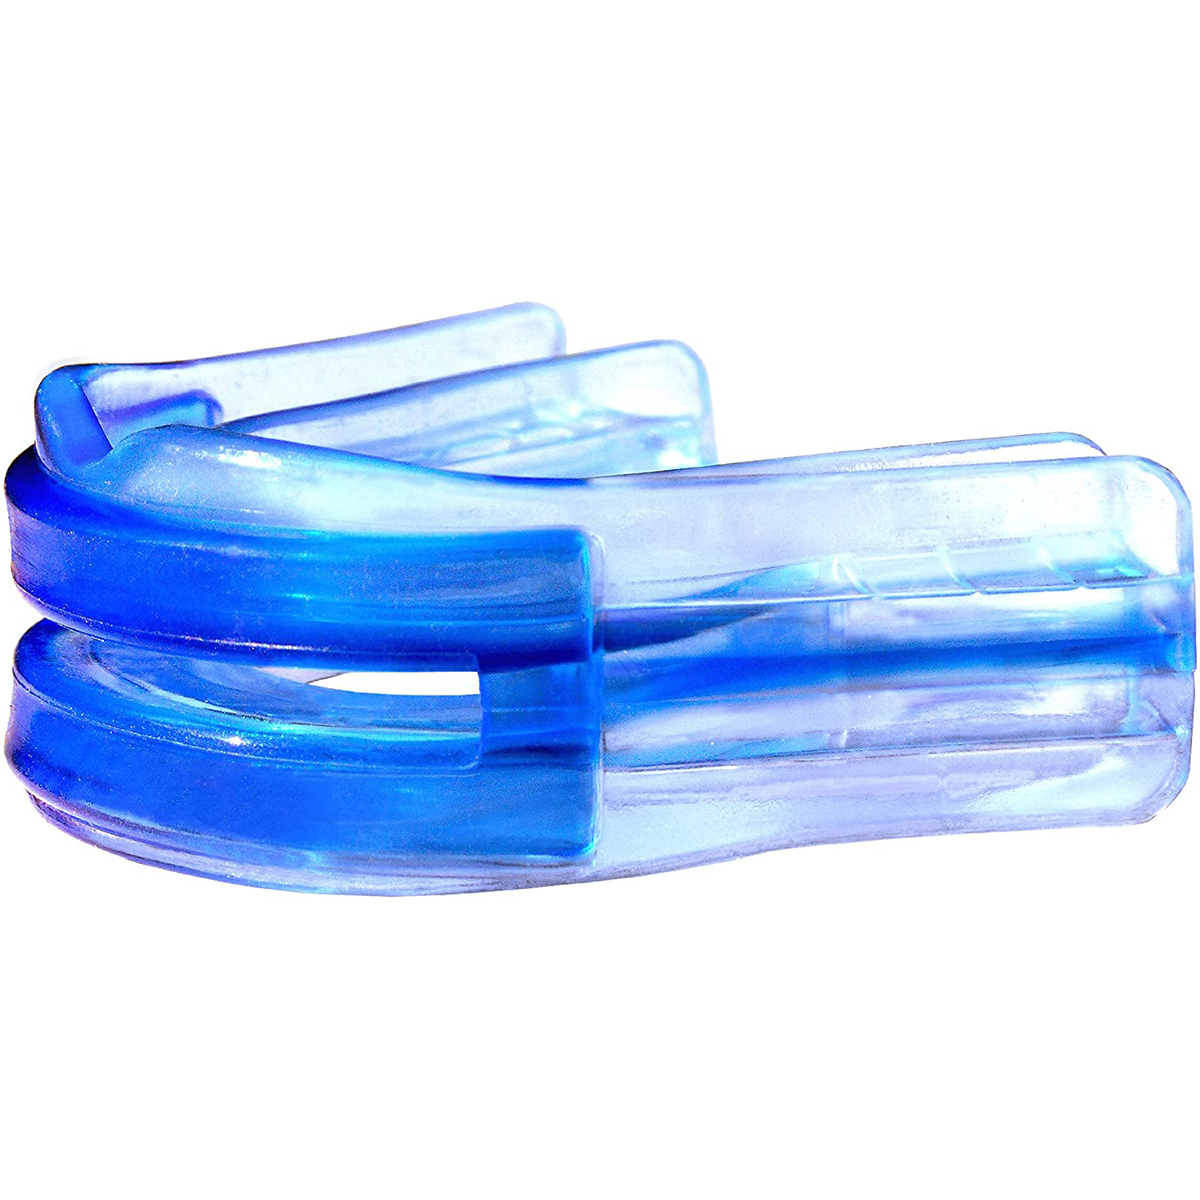 Brain Pad LoPro+ Mouthguard - Adult - Blue - image 2 of 3